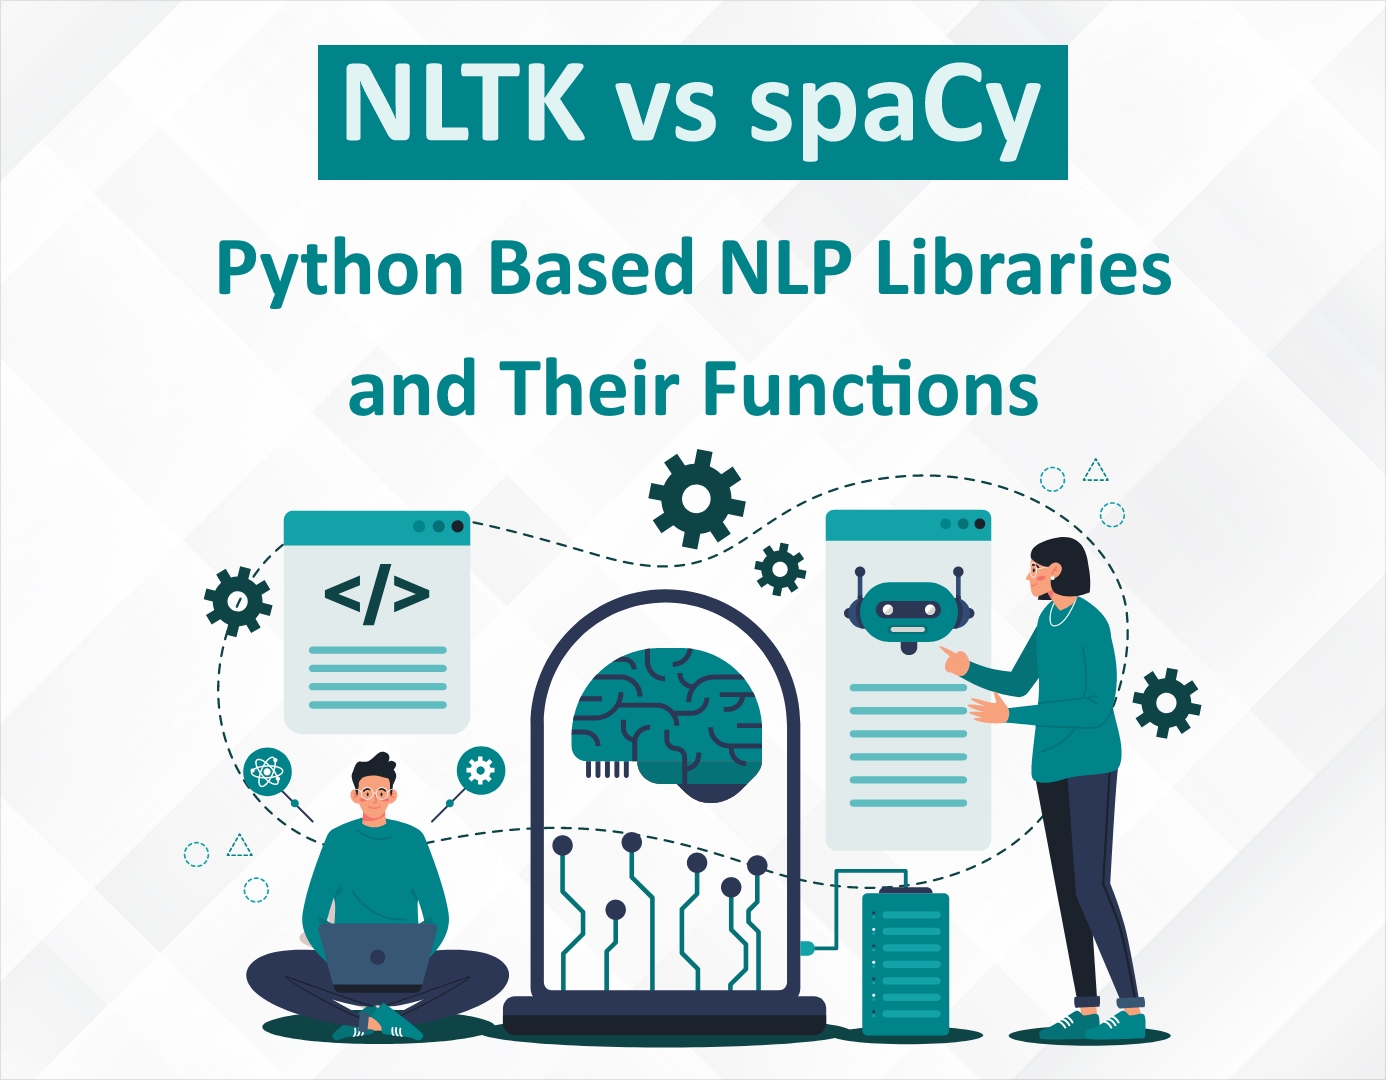 Visual Comparison of NLTK and spaCy - Python NLP Libraries.